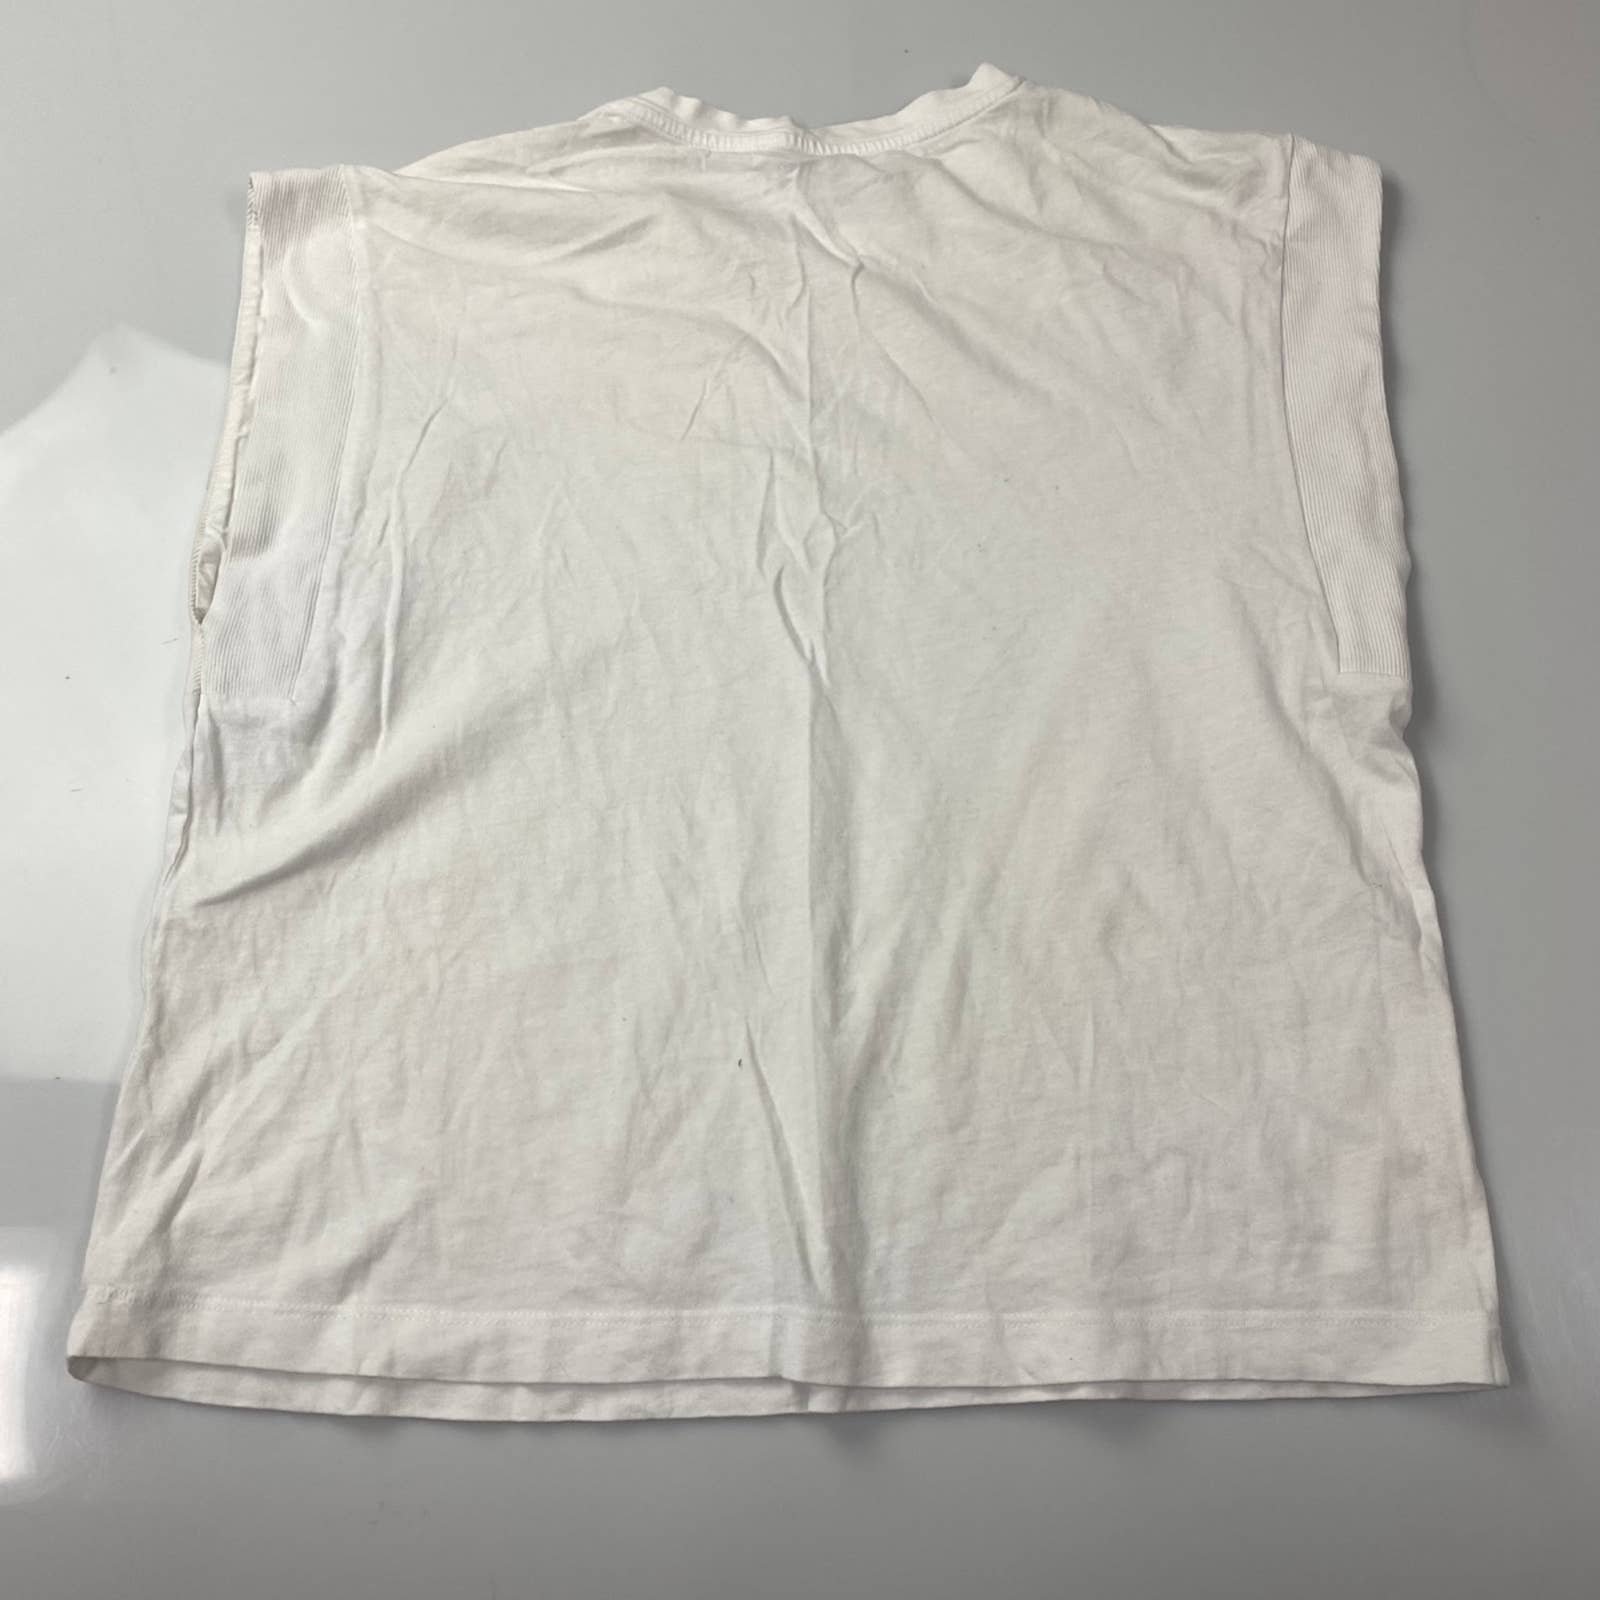 Promotions  ZARA white muscle t-shirt GiOokKC3N Everyday Low Prices